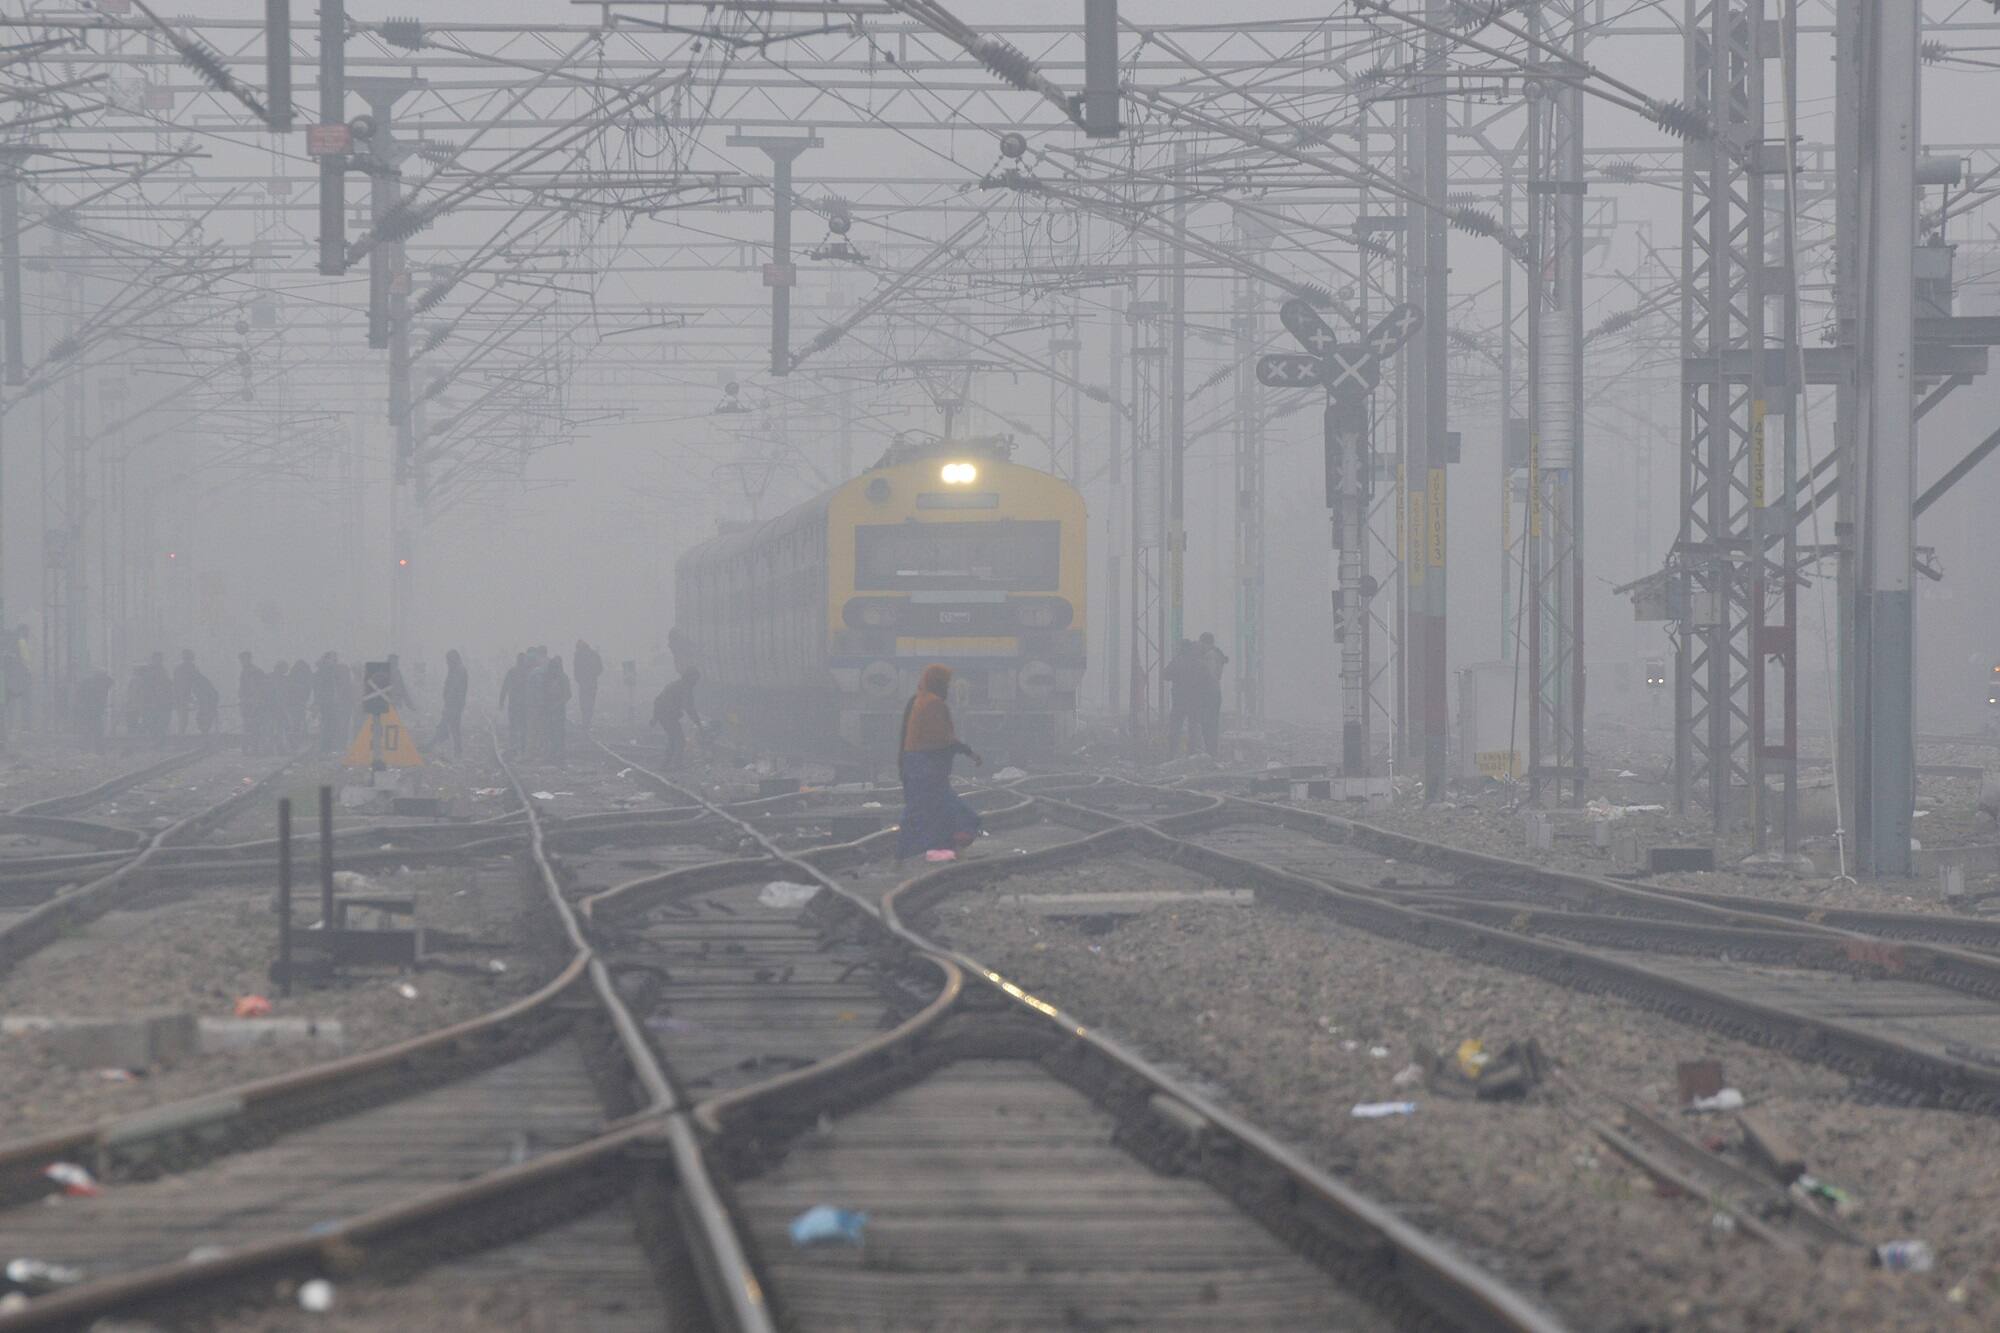 Trains running late as dense fog engulfs Northern India